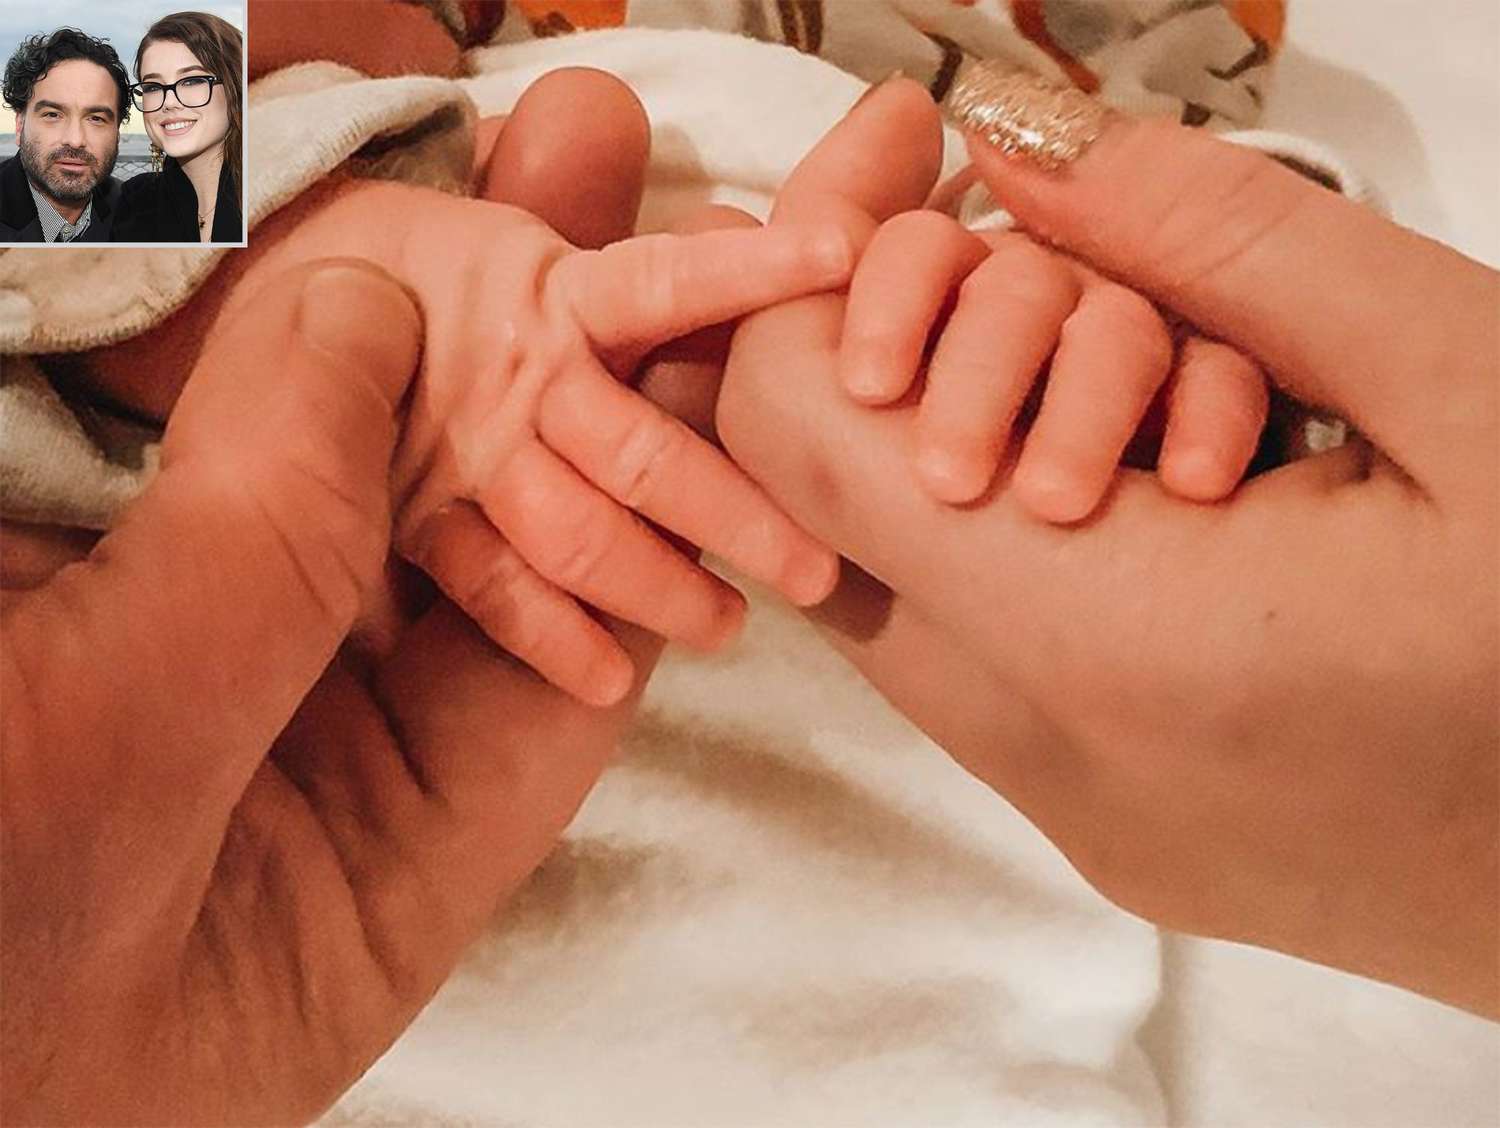 <p>Johnny Galecki and his girlfriend Alaina Meyer announced the birth of their son on social media on Dec. 4, sharing a sweet photo of their newborn's hands.</p>
                            <p>"With full and grateful hearts we welcome our beautiful Avery into this incredible world," Galecki captioned his version of the image, in black and white. "Thank you for all of your love and support. ❤️❤️❤️"</p>
                            <p>The couple first announced that they were expecting back in May.</p>
                            